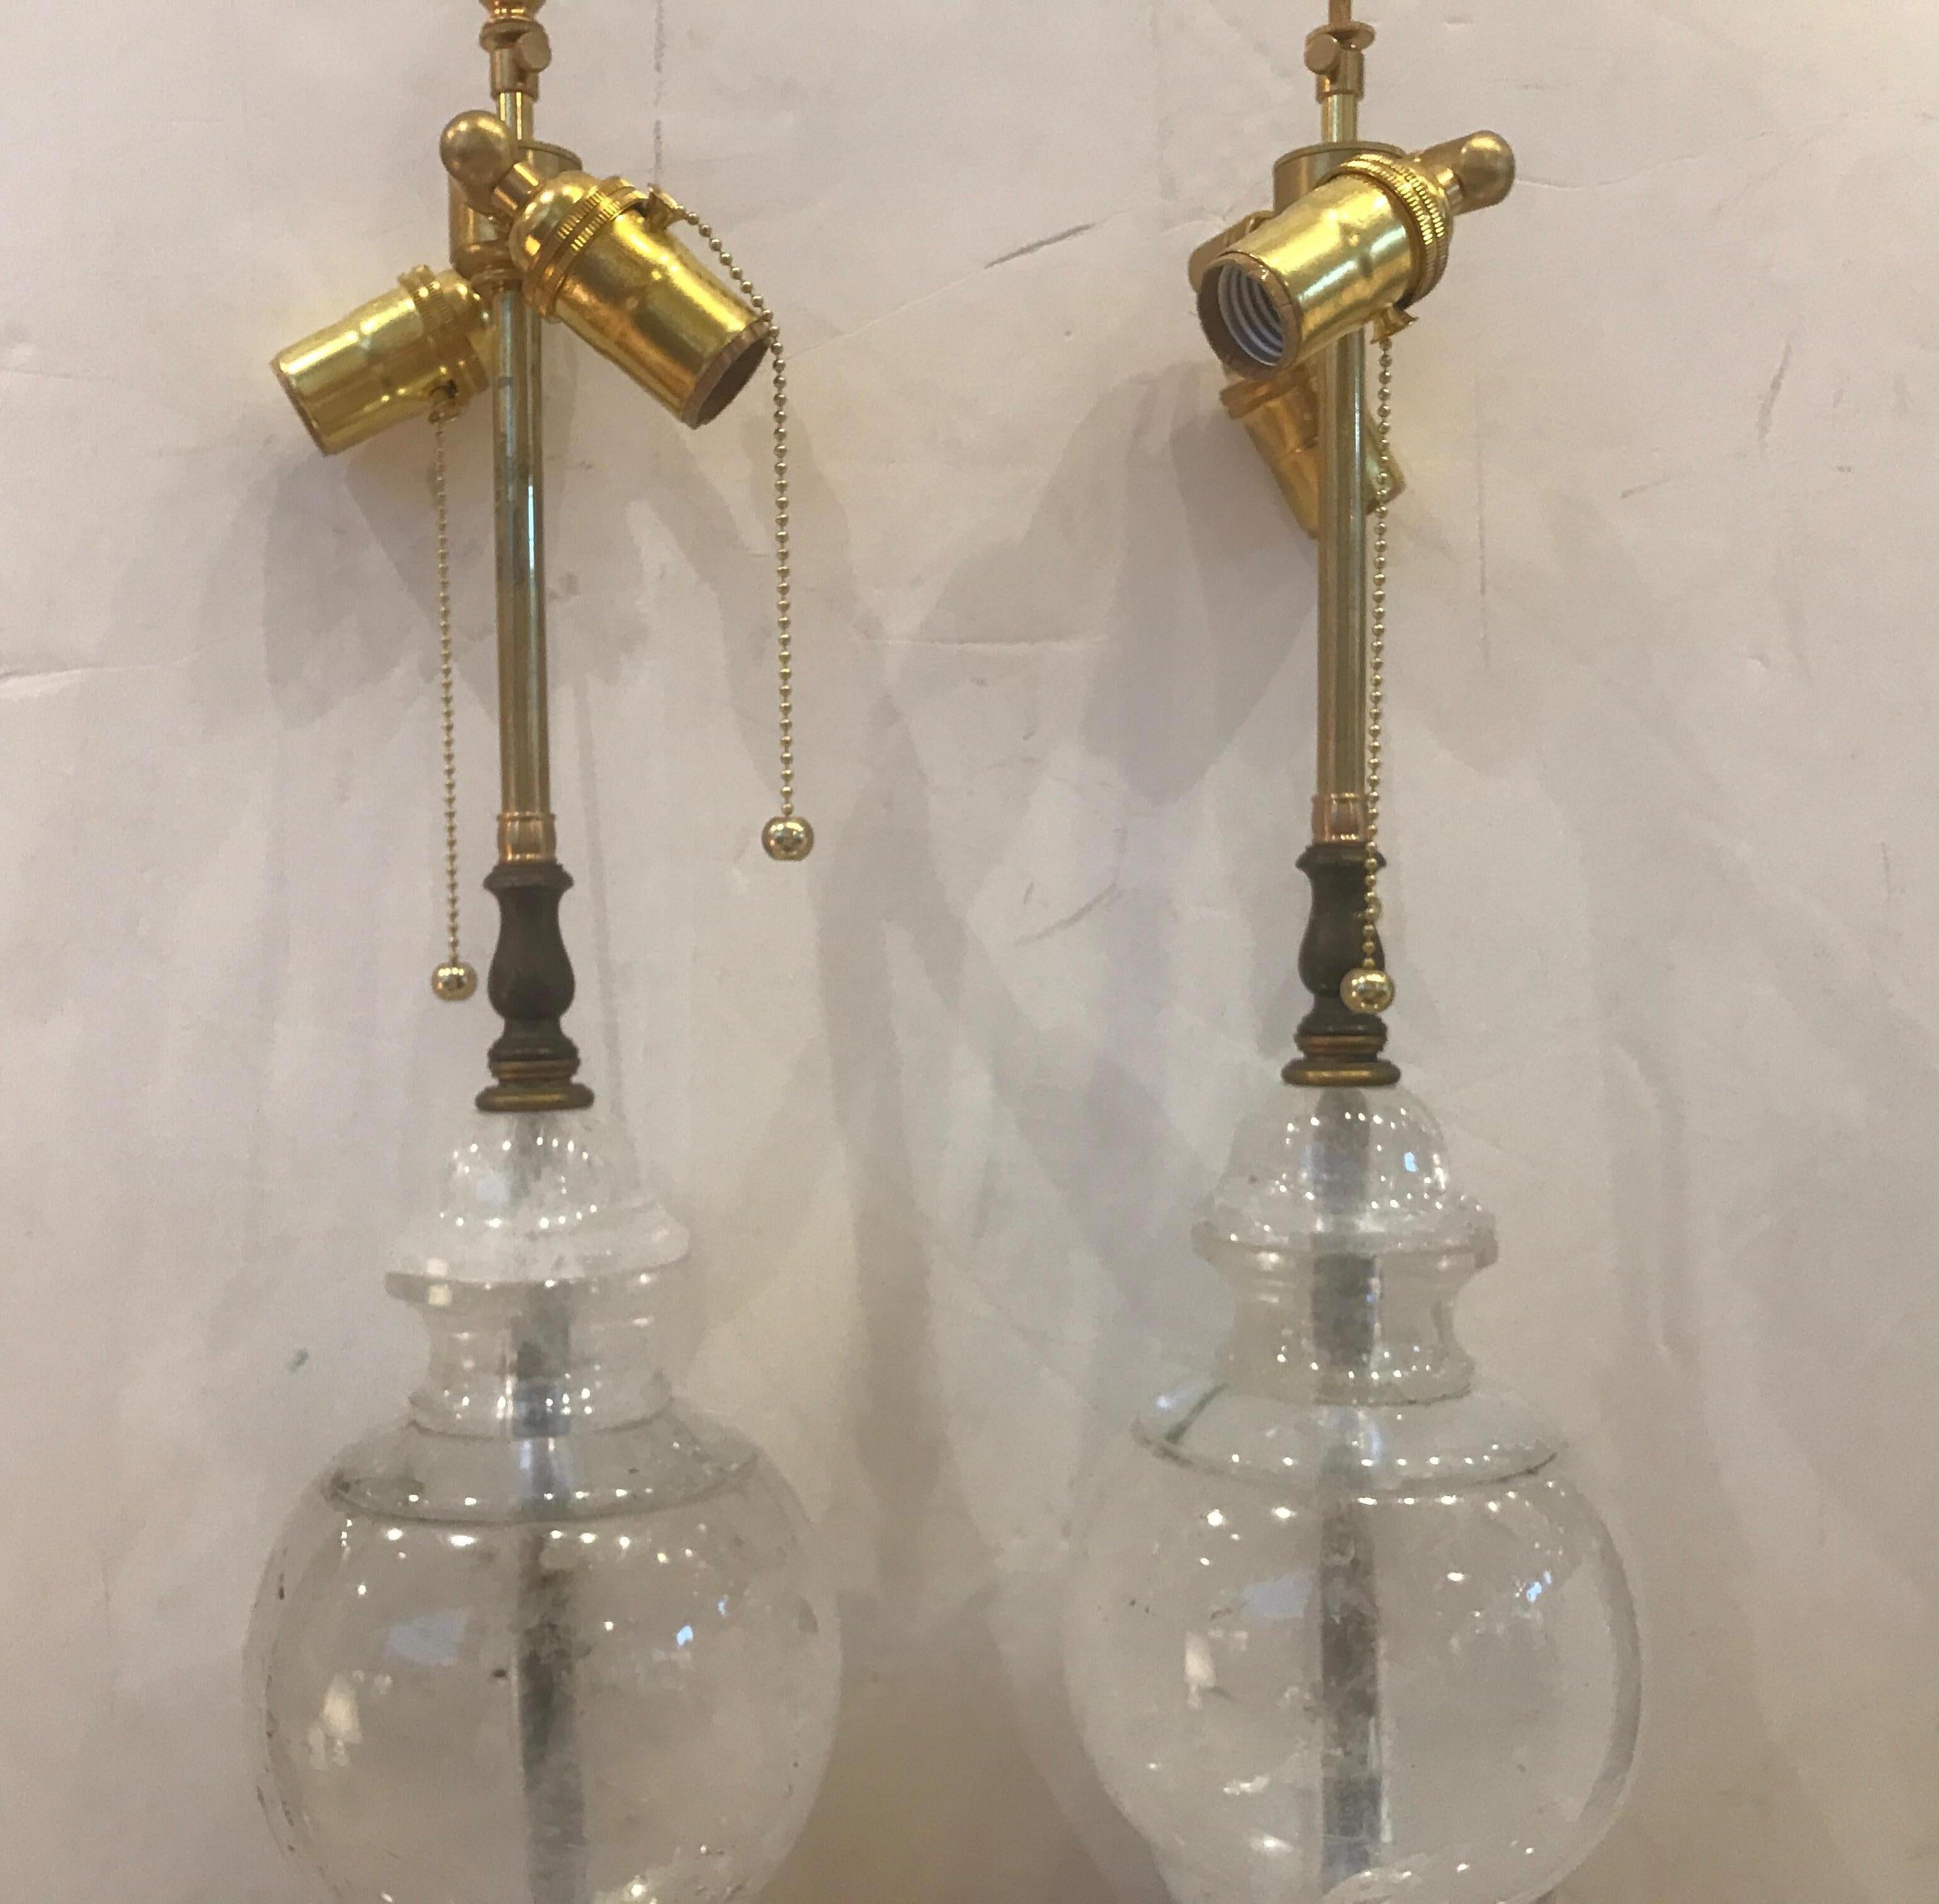 French Pair of Rock Crystal and Ormolu Lamps